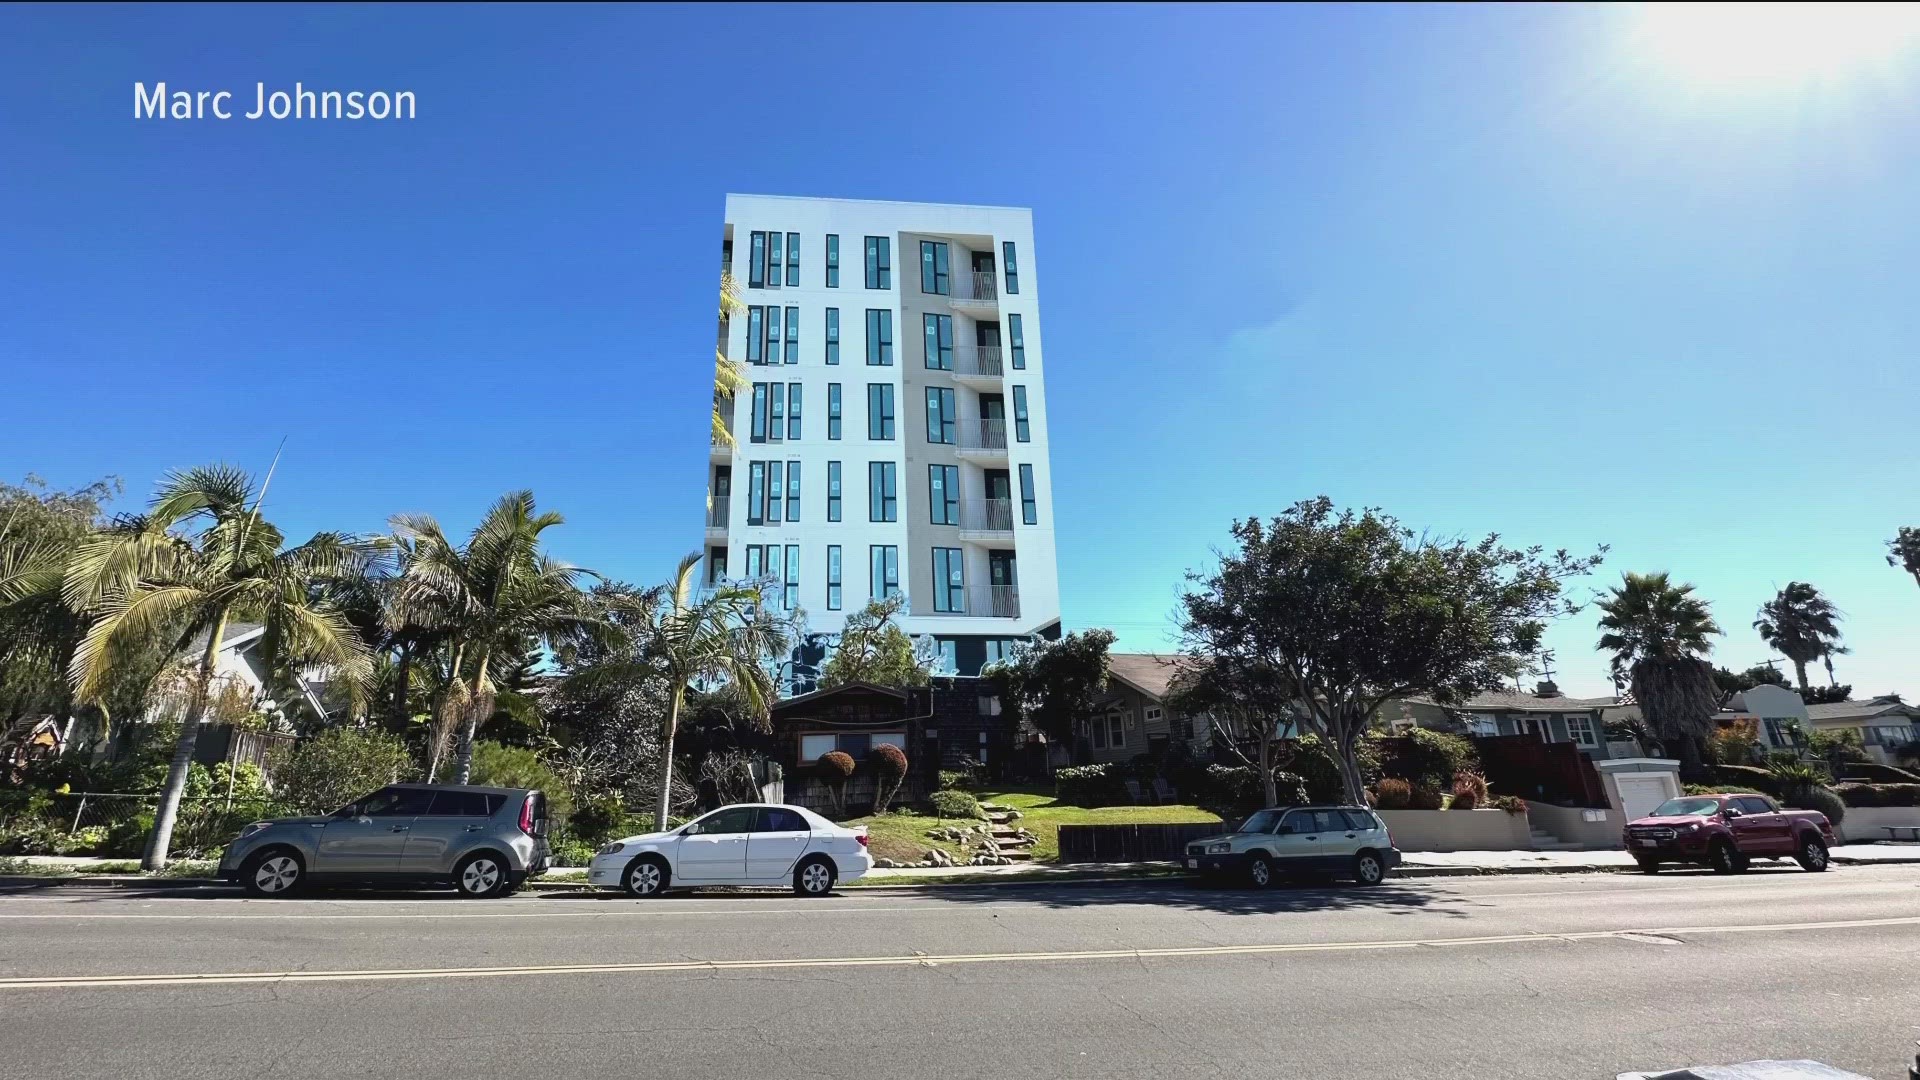 The eight-story residential building is set to go up on a street where the tallest building is just three-stories high.